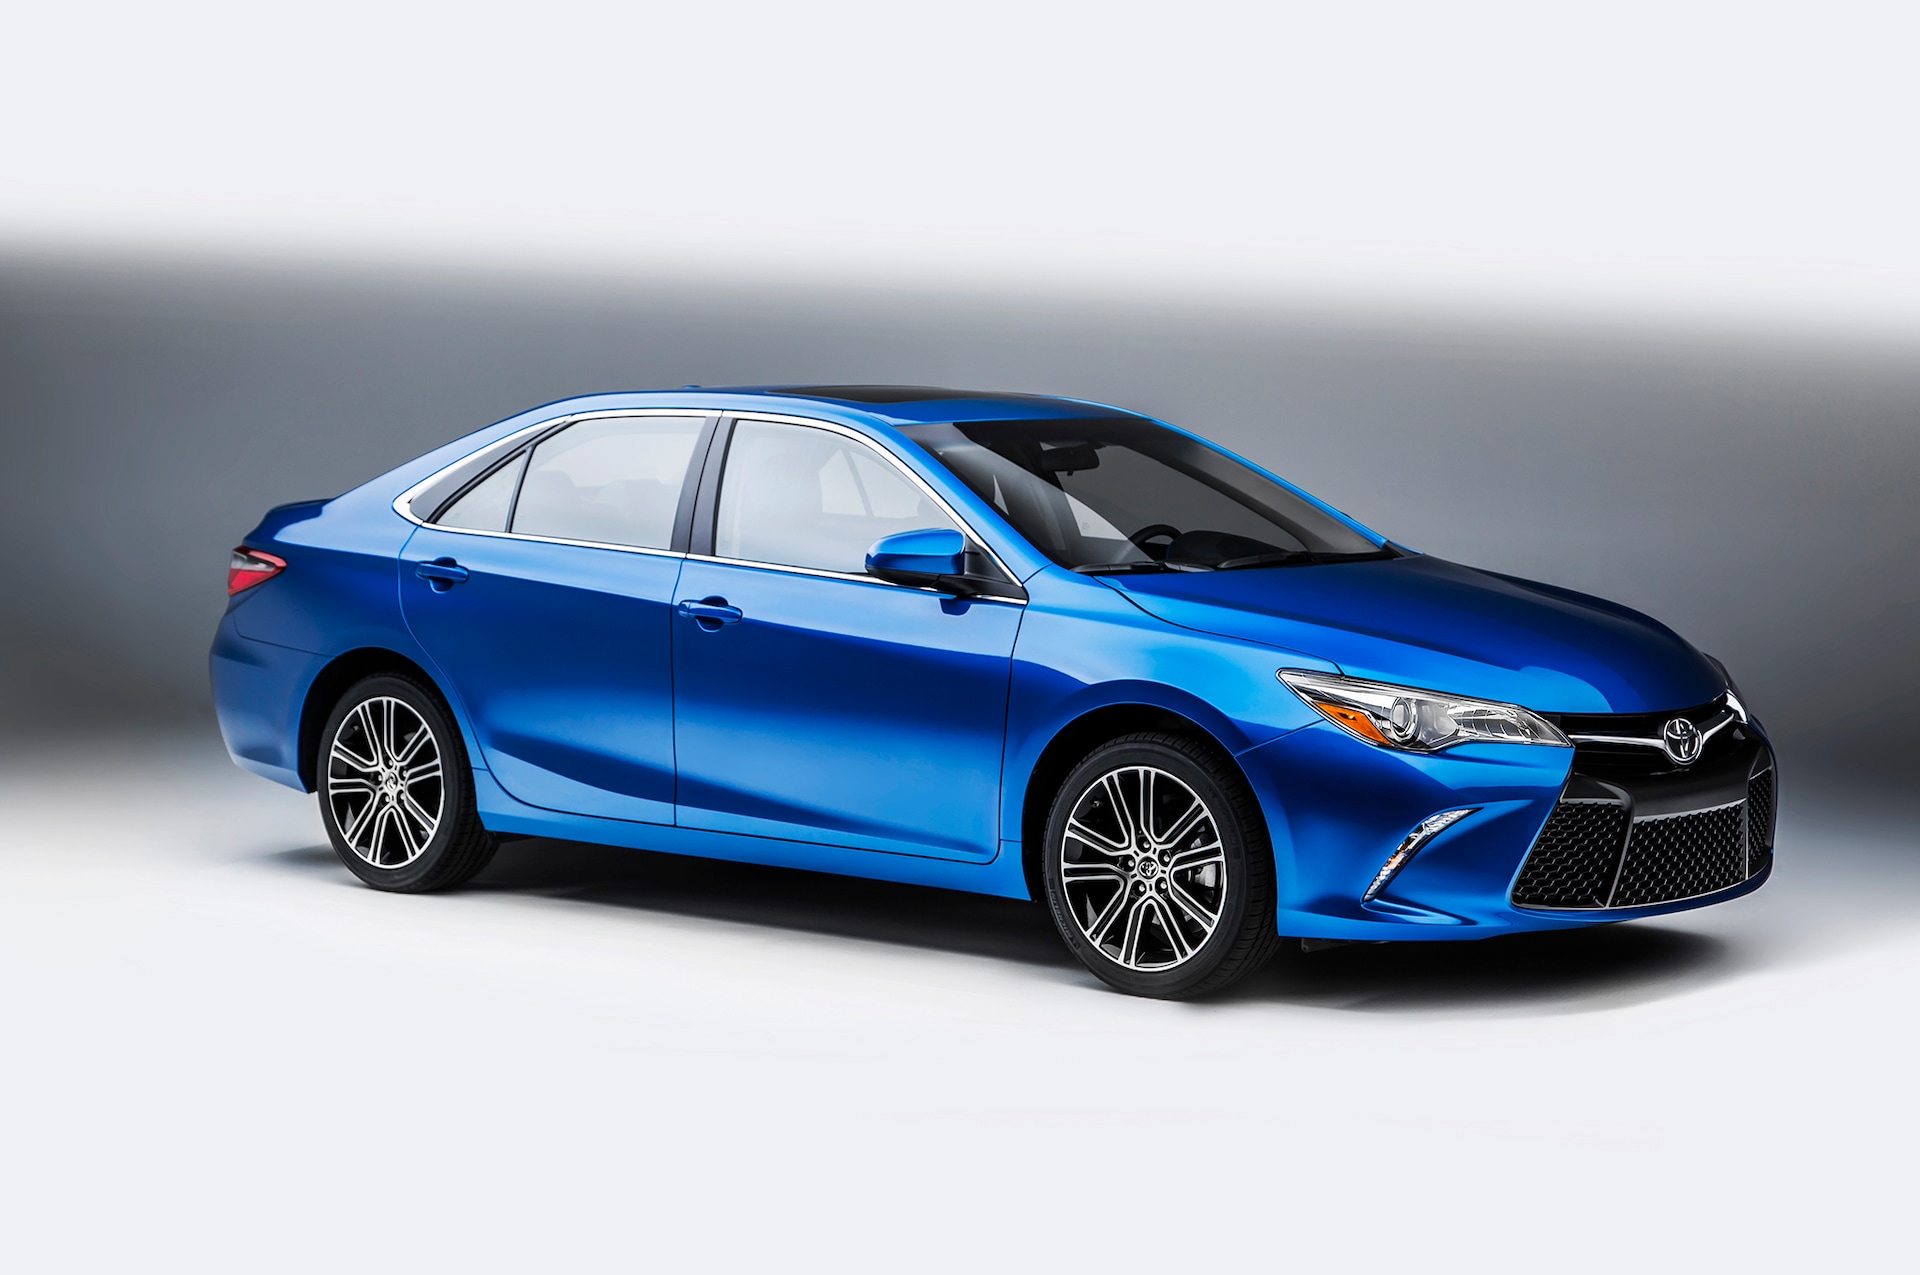 2016 Toyota Camry Prices, Reviews, and Photos - MotorTrend